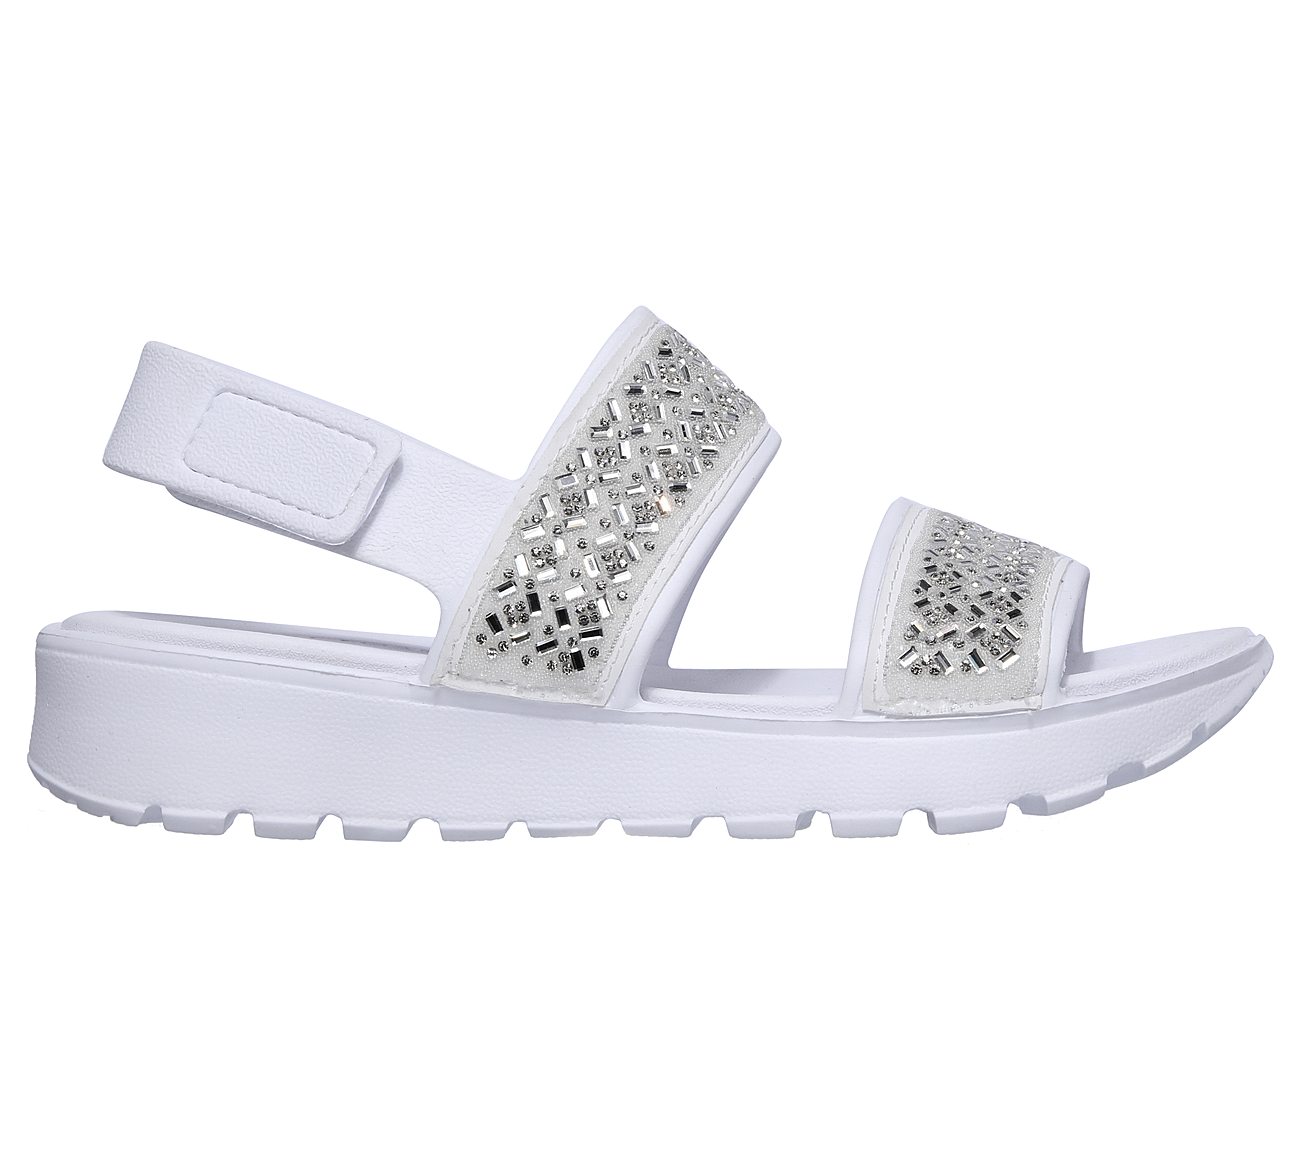 Skechers Cali Gear Footsteps Glam Party Sandal - White